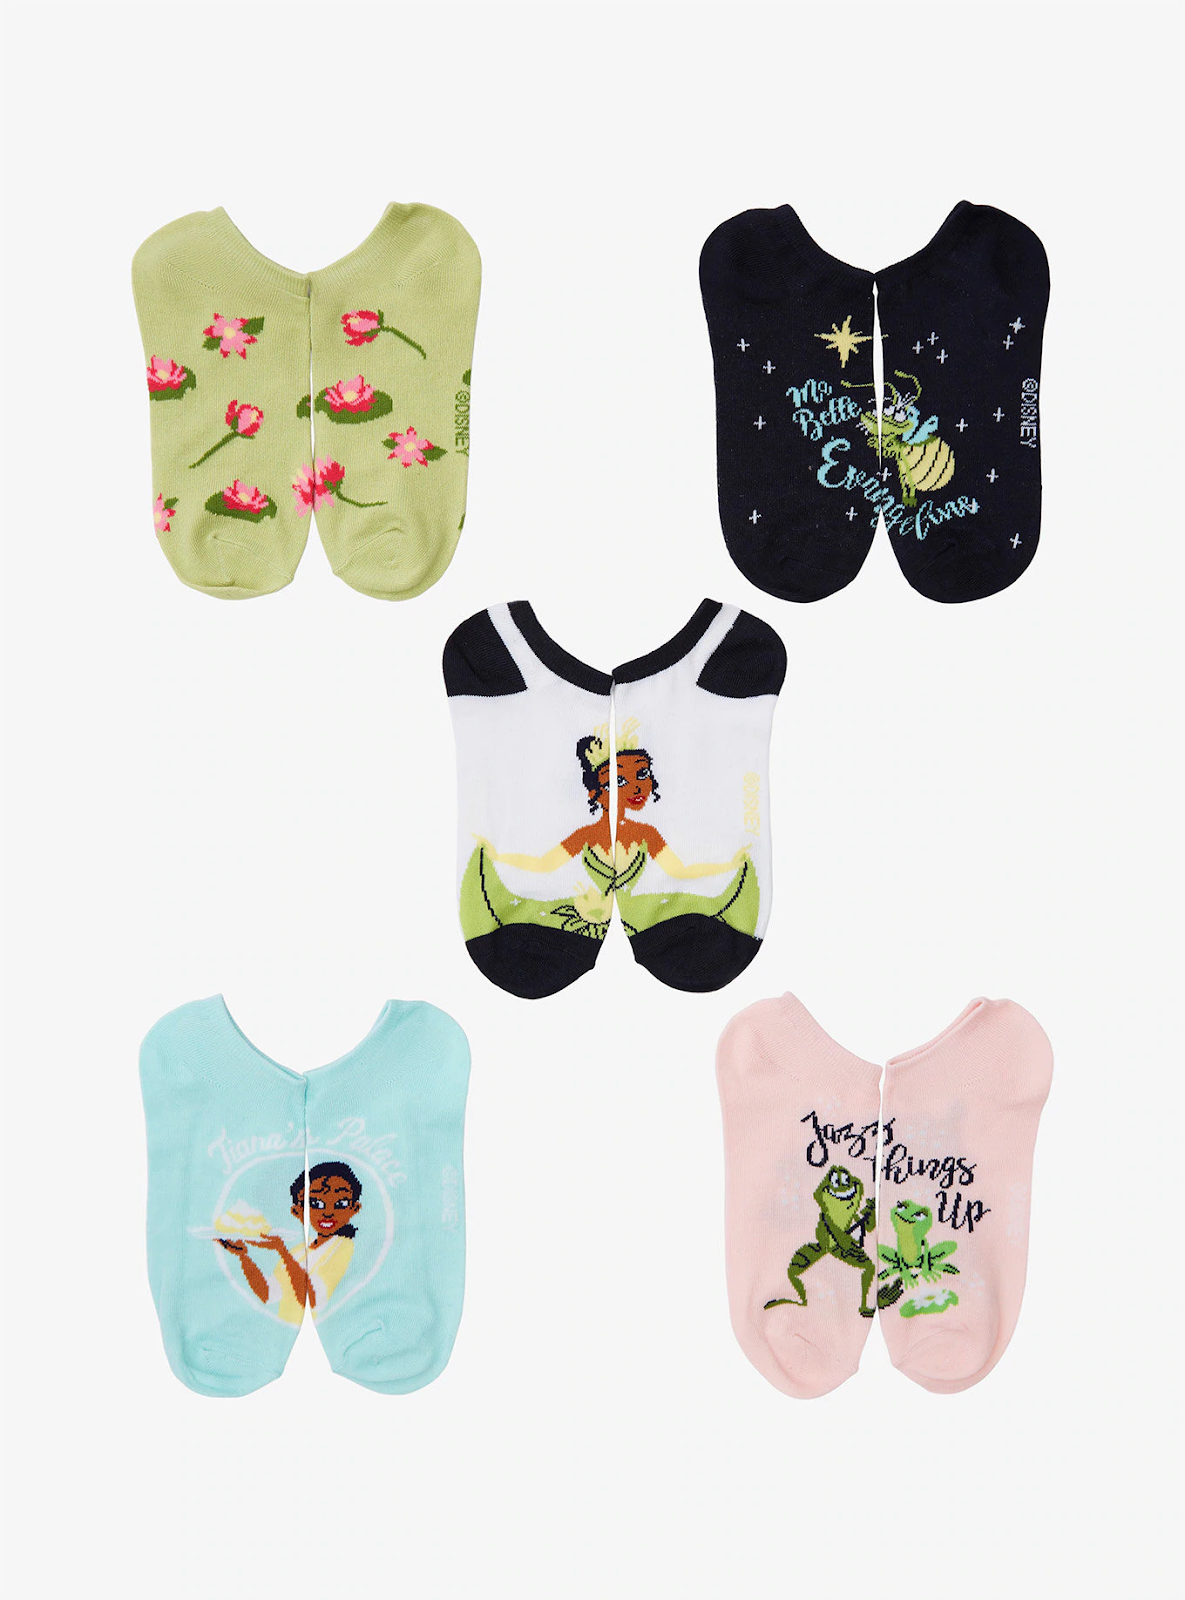 New Princess And The Frog Merchandise Arrives at Box Lunch 